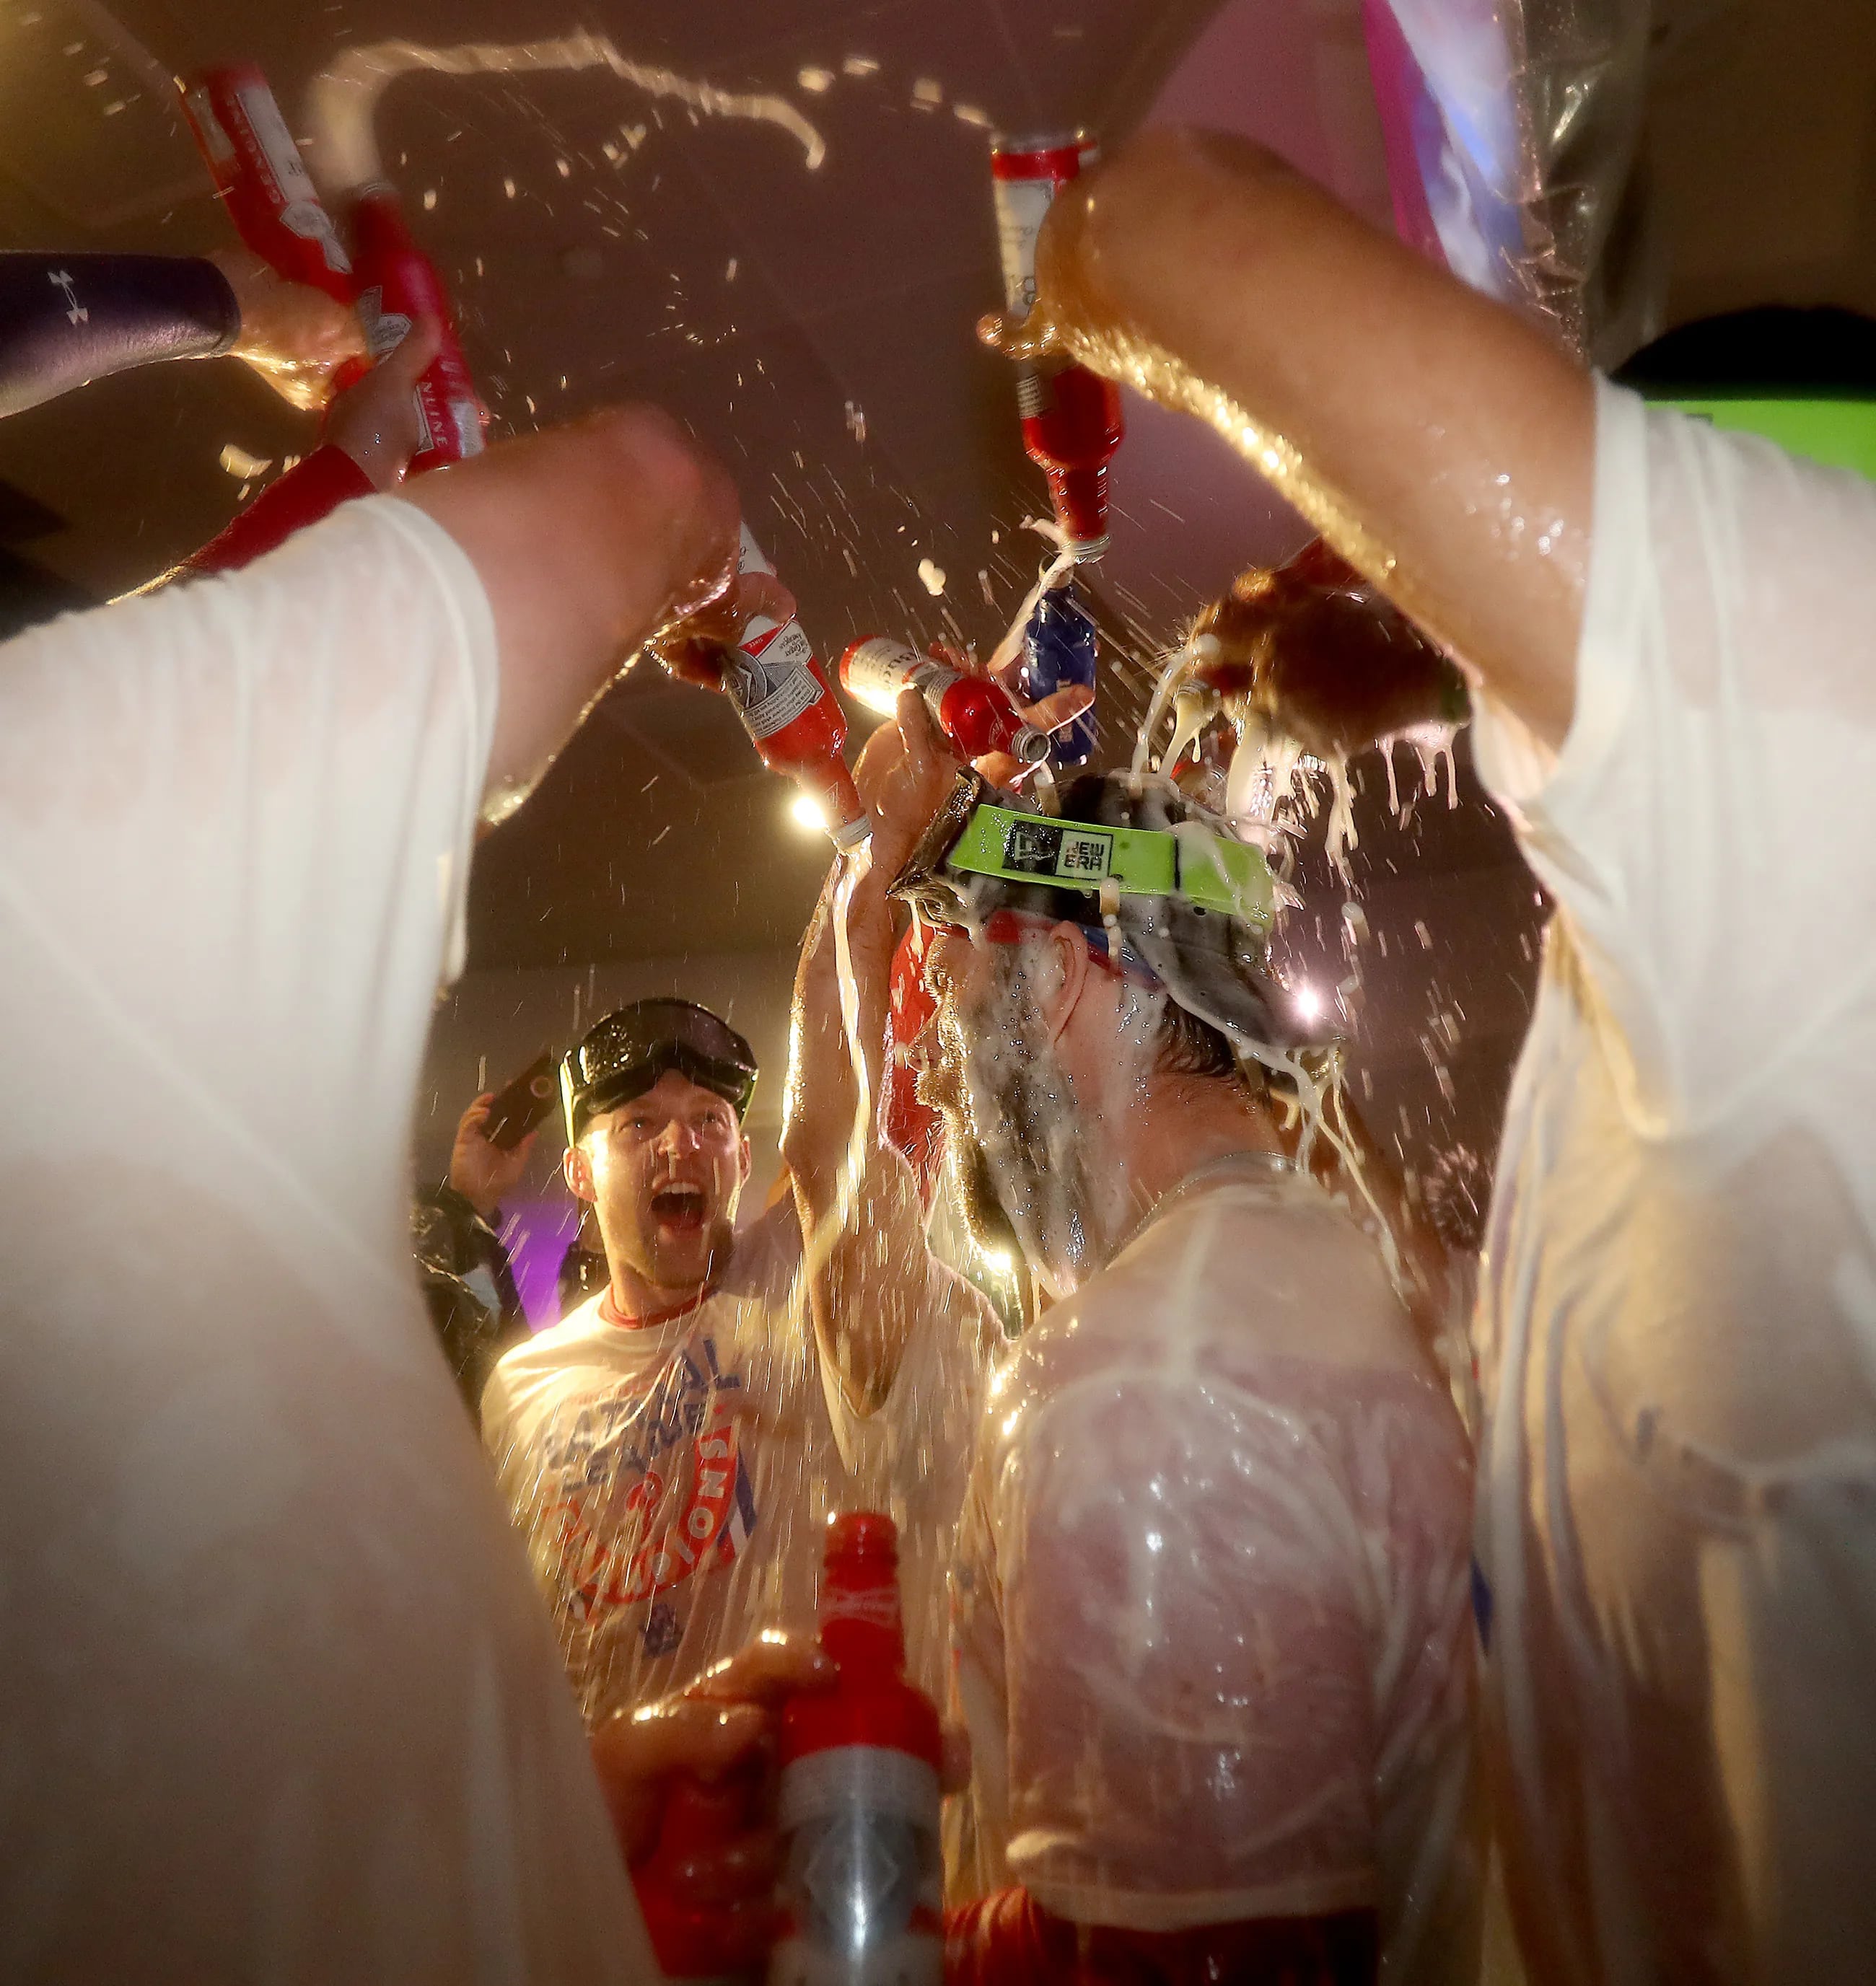 Photos: Phillies win the National League Championship